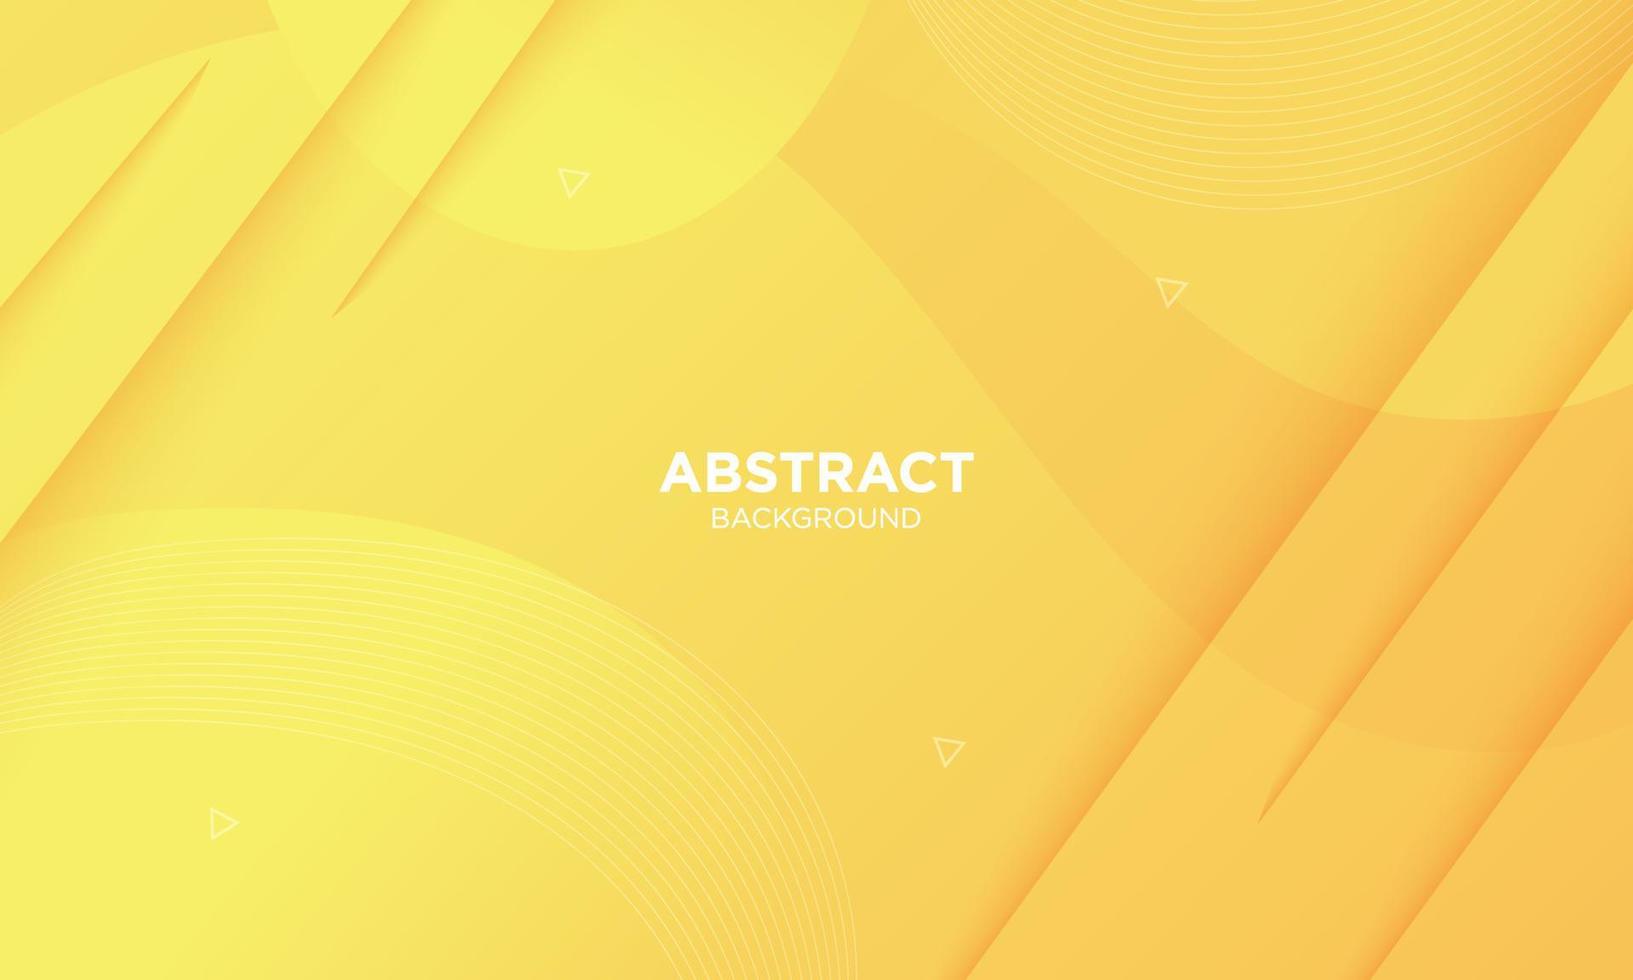 Abstract Yellow Fluid Wave Background vector